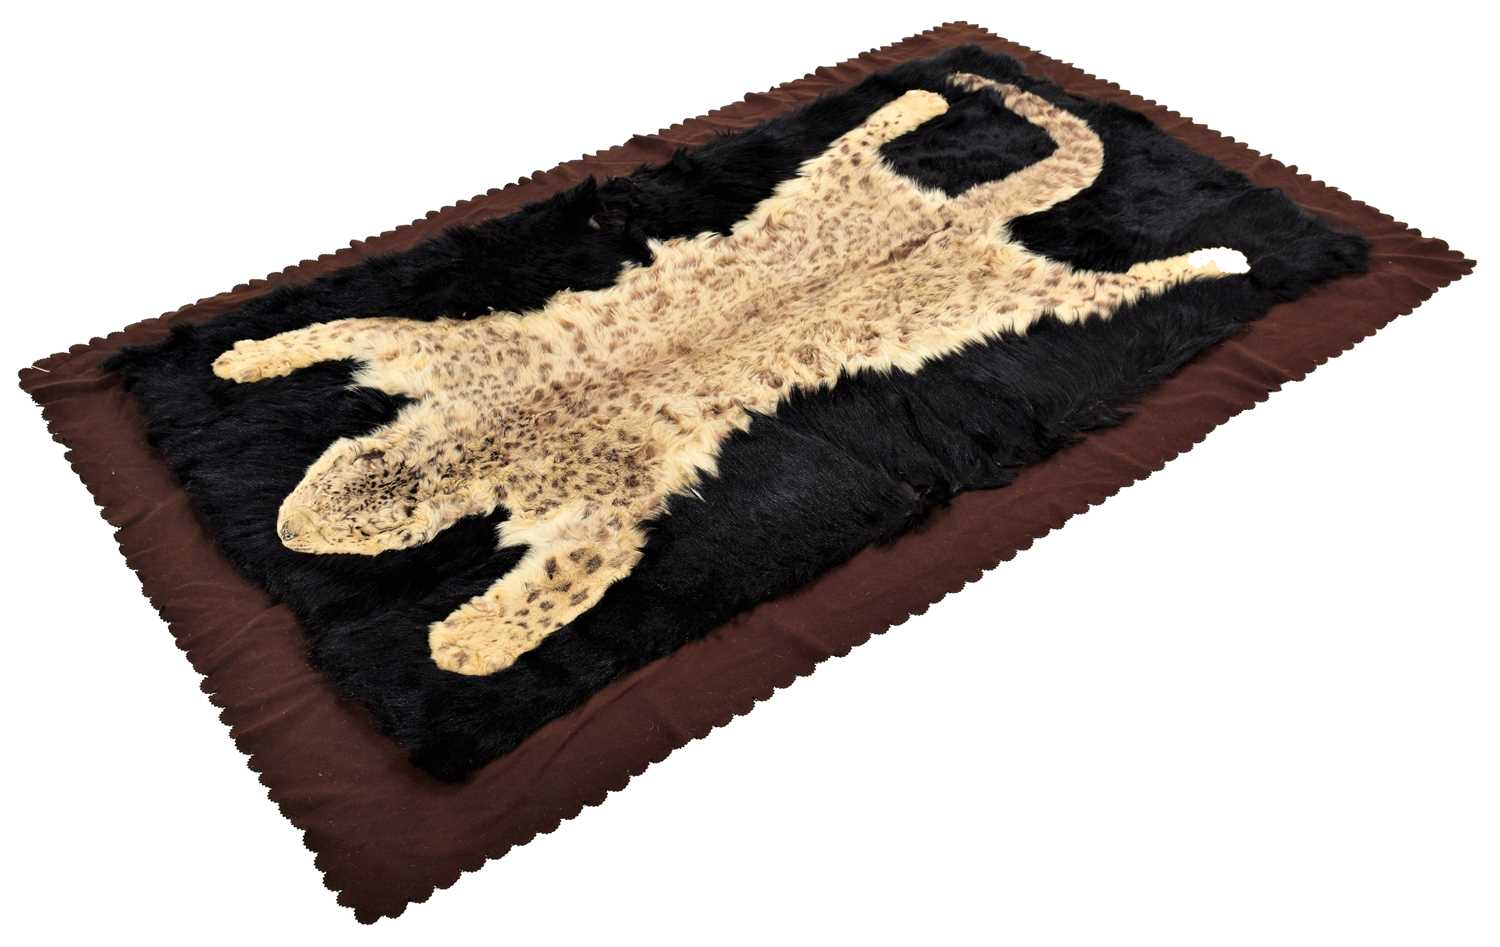 Taxidermy: A Rare Snow Leopard Skin Rug / Carriage Blanket (Panthera uncia), circa 1920-1930, by